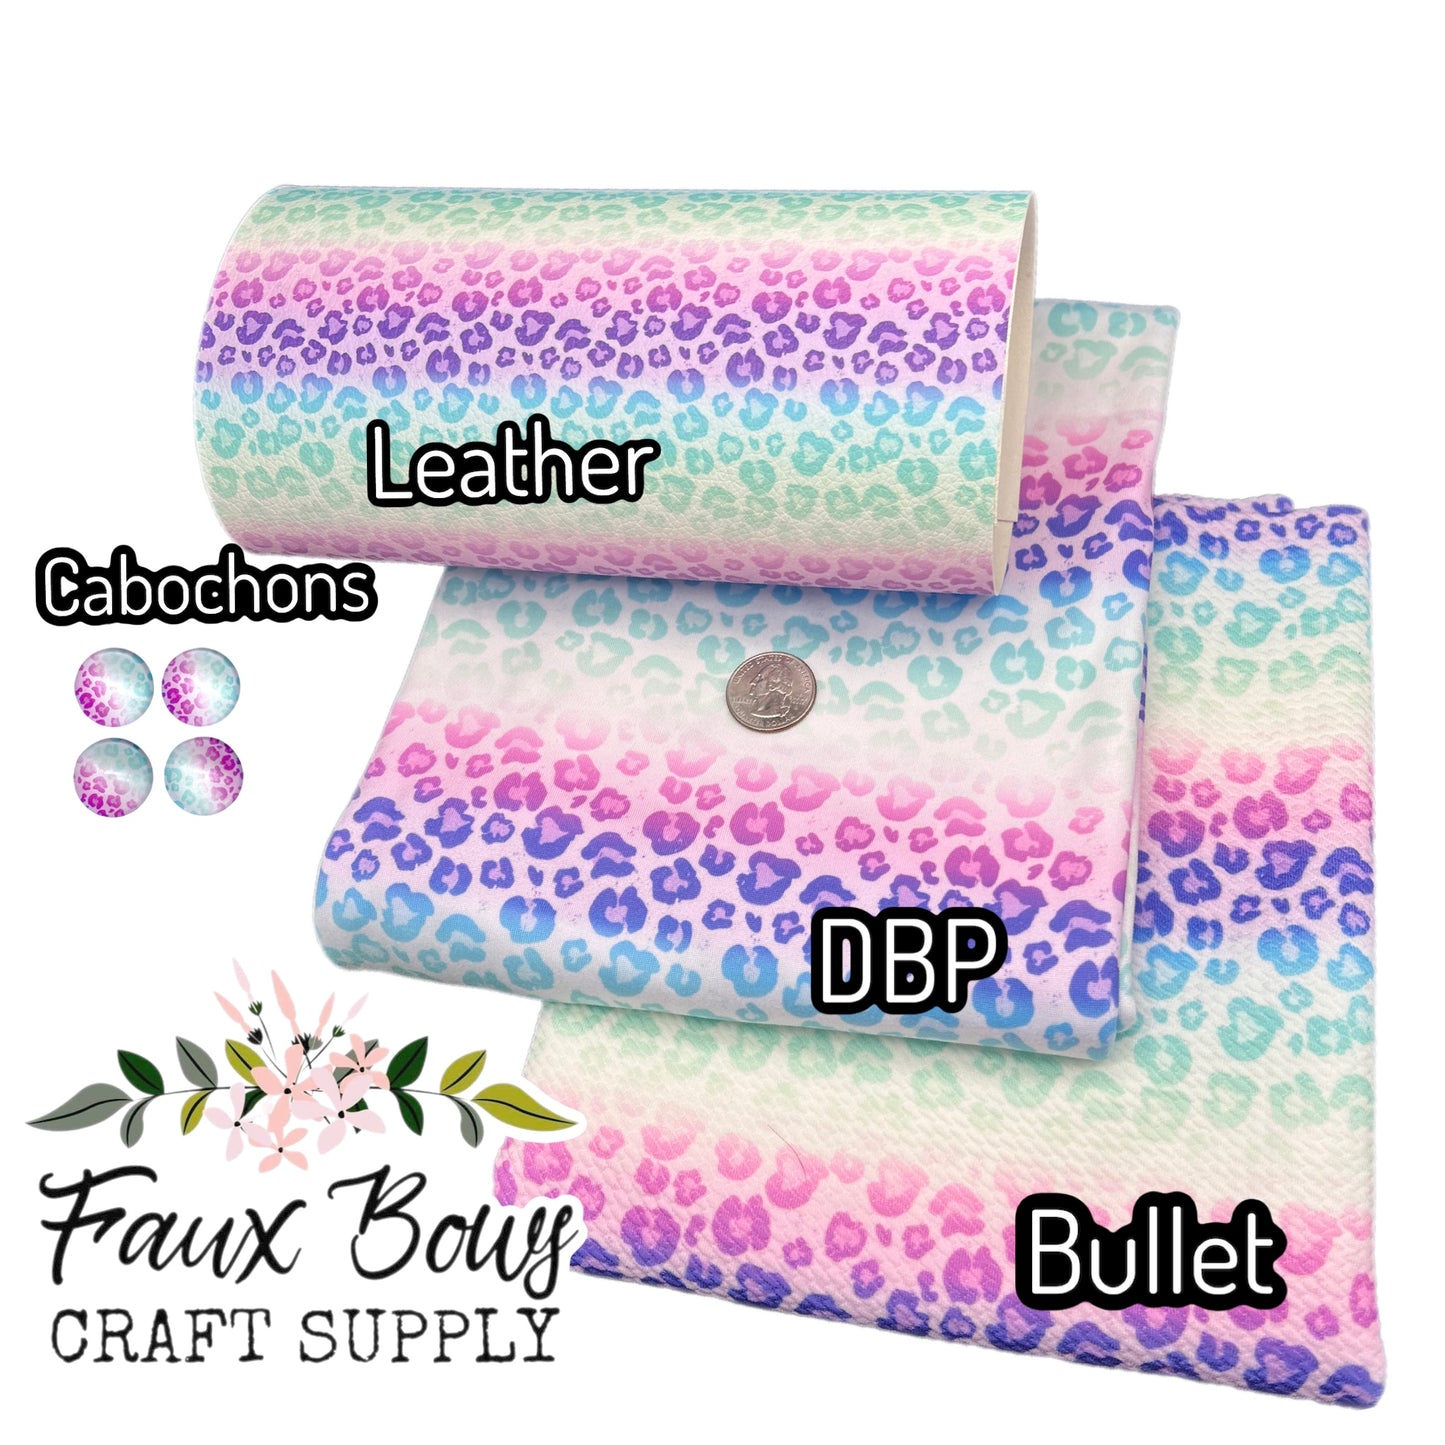 Neon Leopard Printed Fabric- Bullet/DBP/Leather